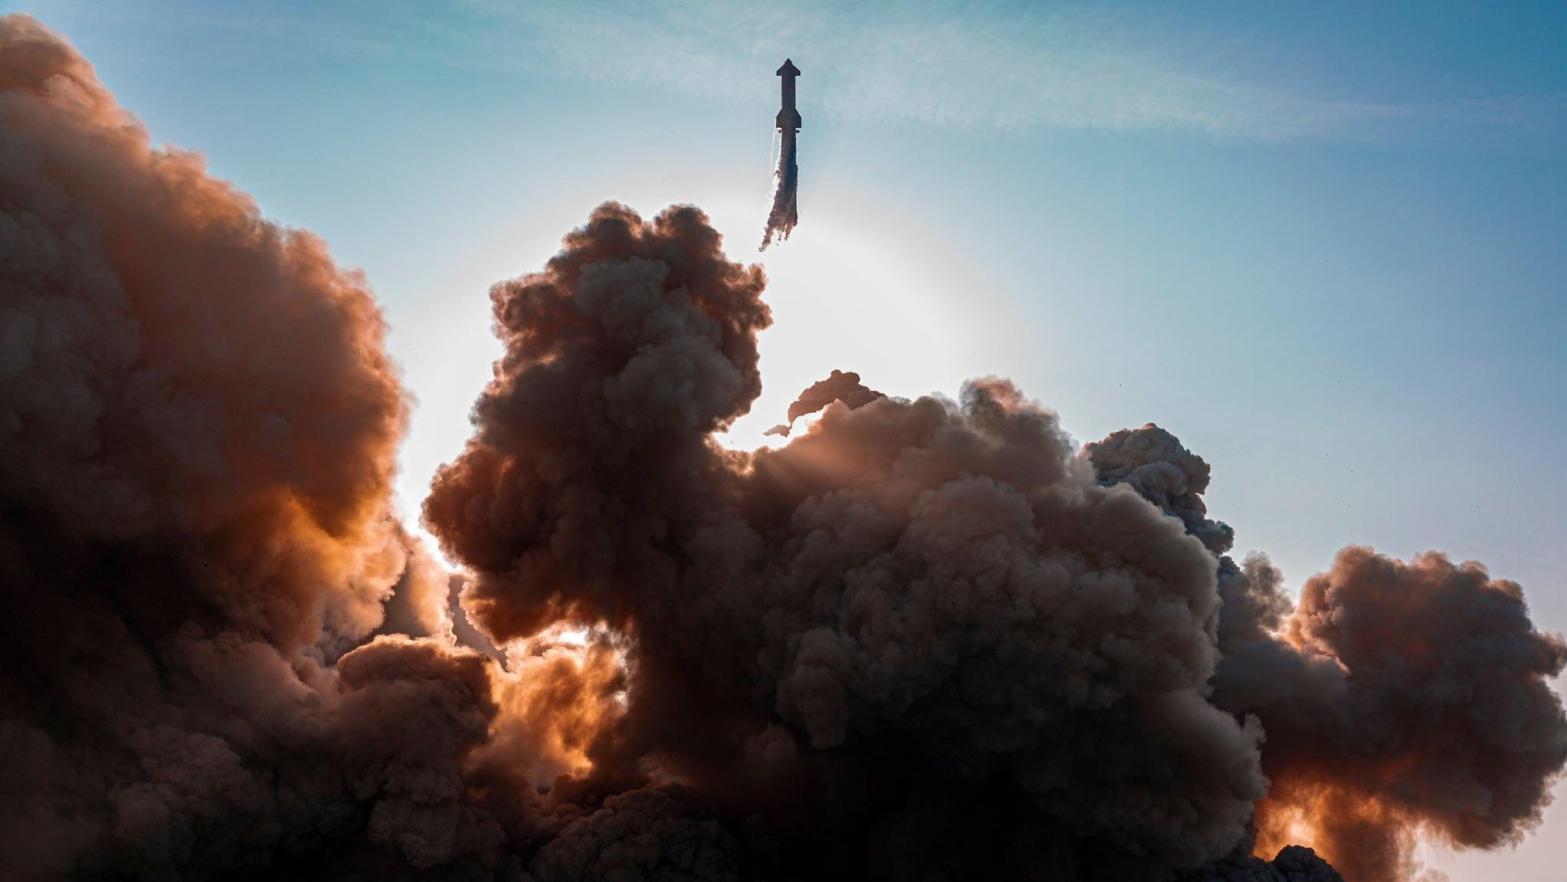 SpaceX's Starship sent a massive amount of dust, dirt, and other debris into the air as it launched without any infrastructure in place to minimise impact and suppress energy at the launch site. (Photo: SpaceX)